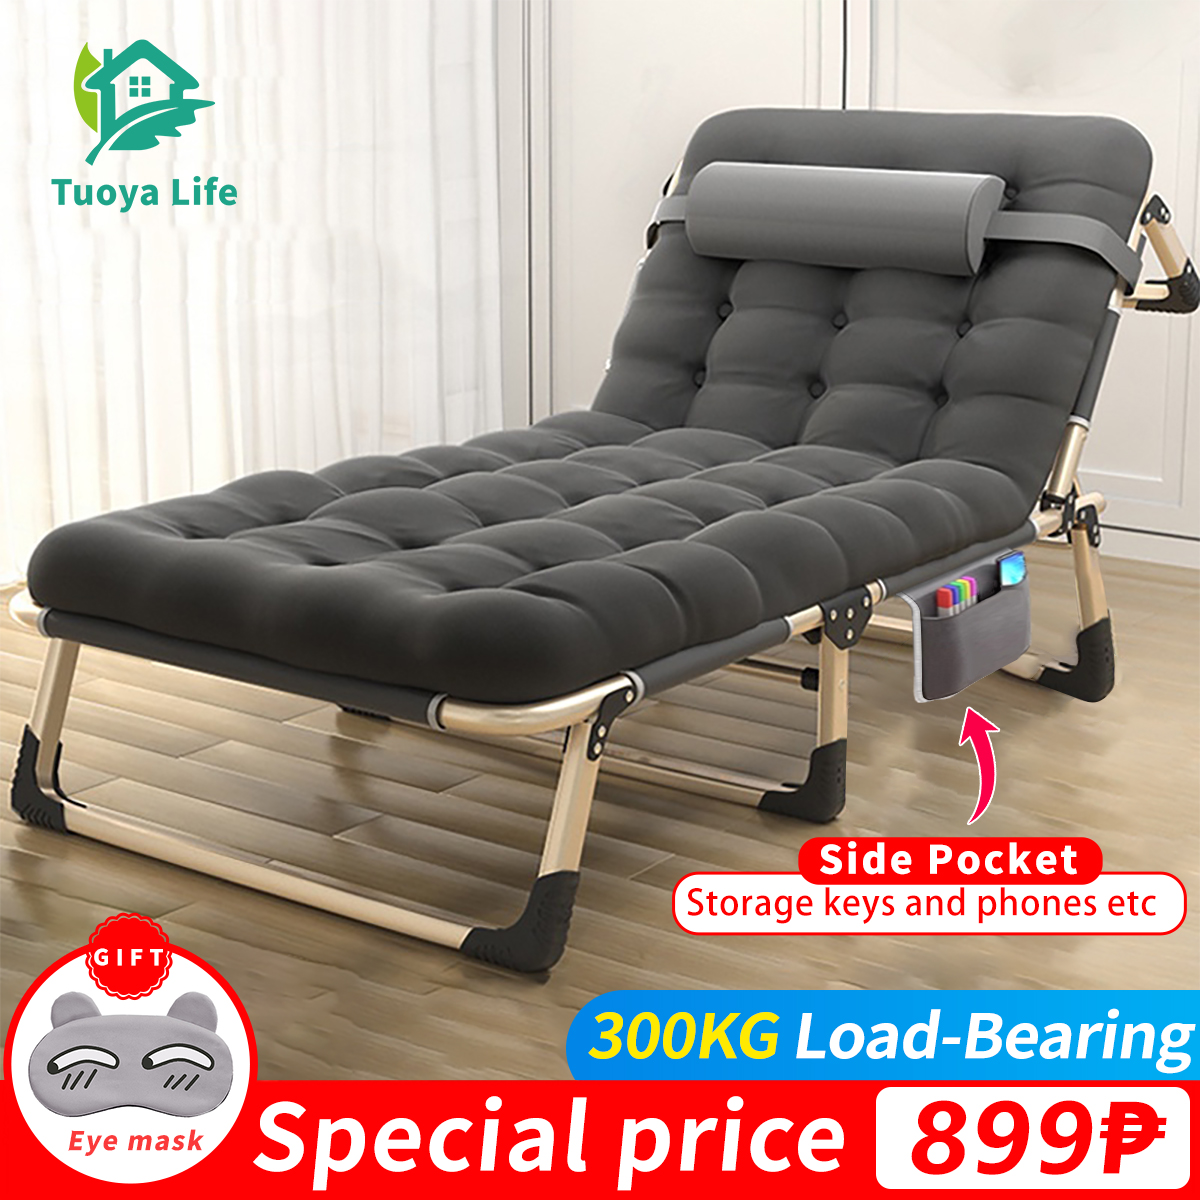 Tuoya Portable Folding Bed - Lightweight and Versatile Sofa Bed